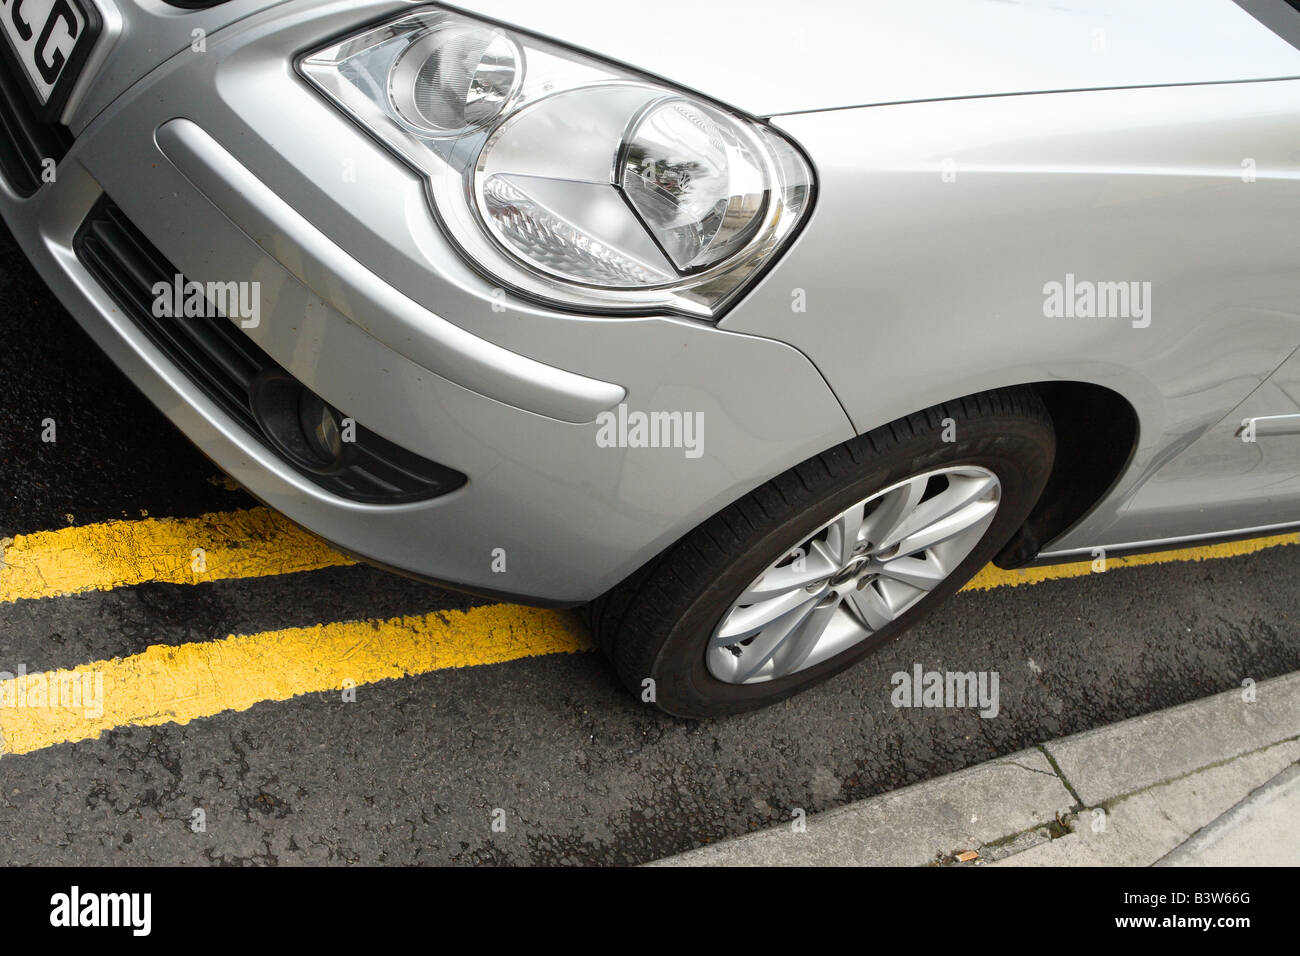 Car parked on double yellow lines no parking line Stock Photo